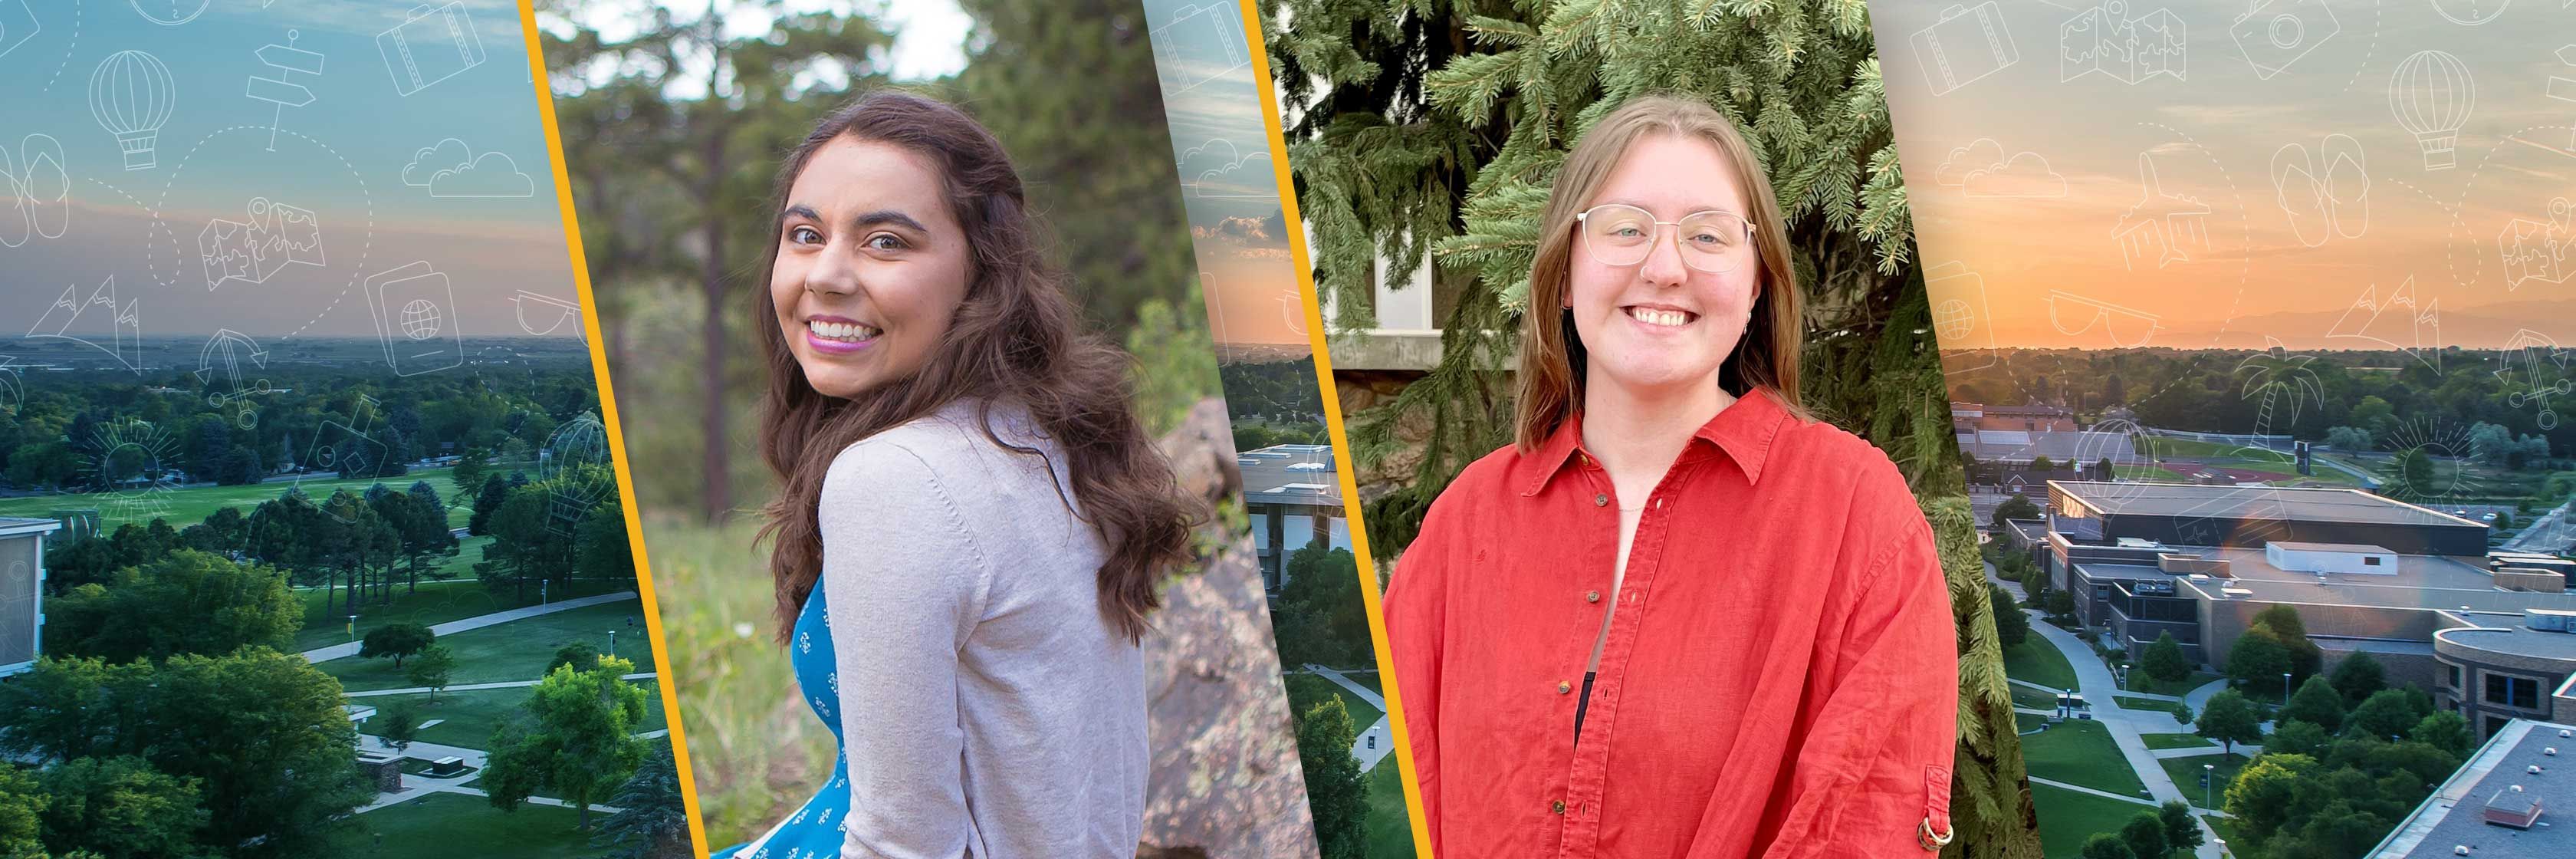 Semifinalists for the fulbright award, Pennie Nichol (left) and Jenna Mischke (right).